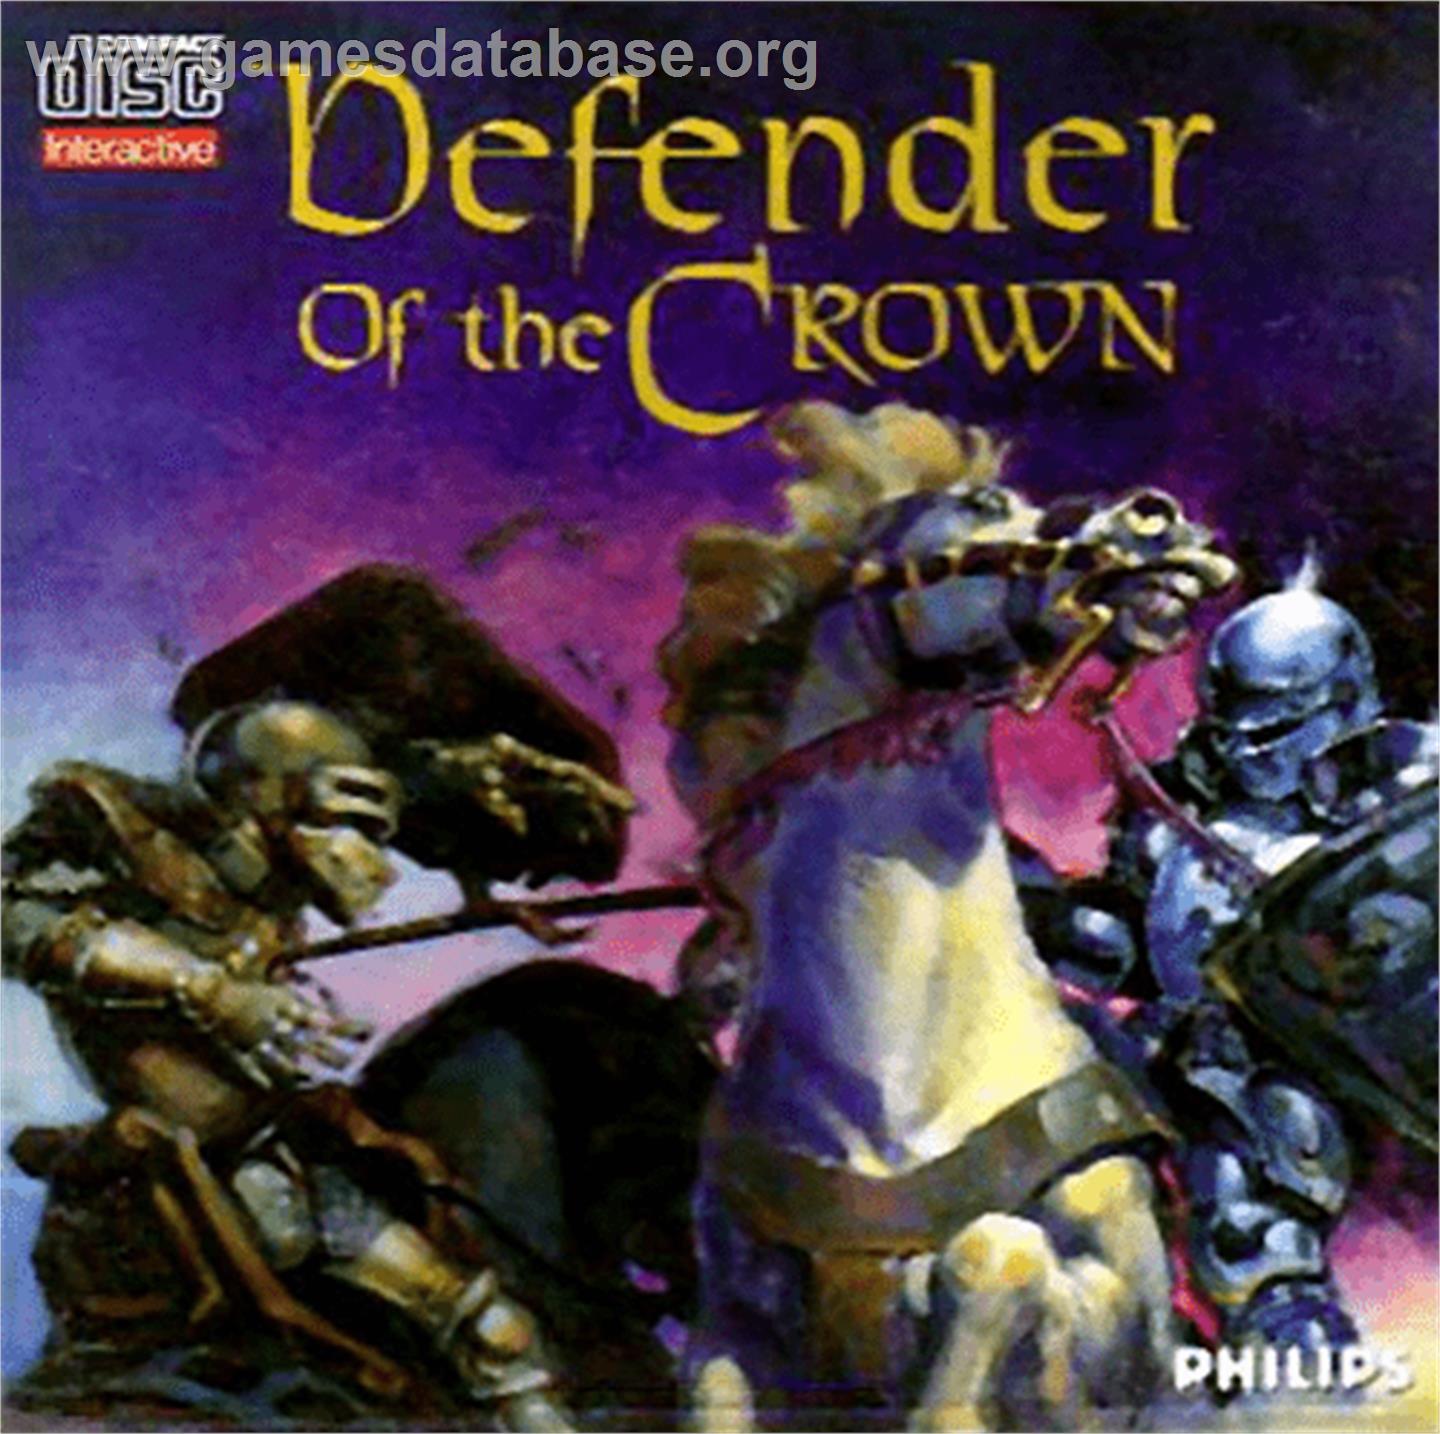 Defender of the Crown - Philips CD-i - Artwork - Box